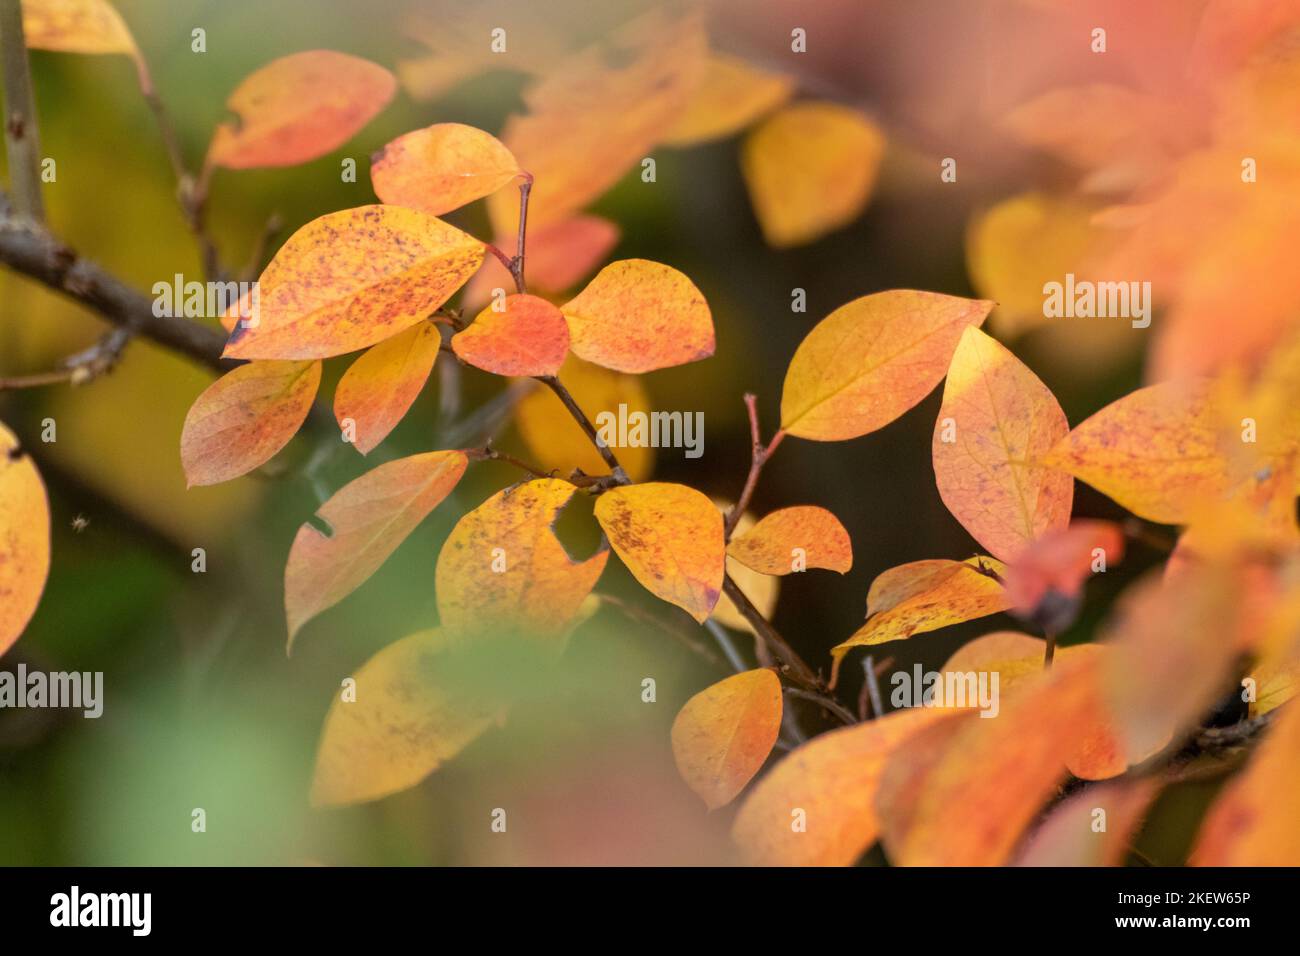 Autumn colorful vibrant leaves branches close-up with blur, flora background. Autumnal forest in orange and yellow colors, nature details Stock Photo